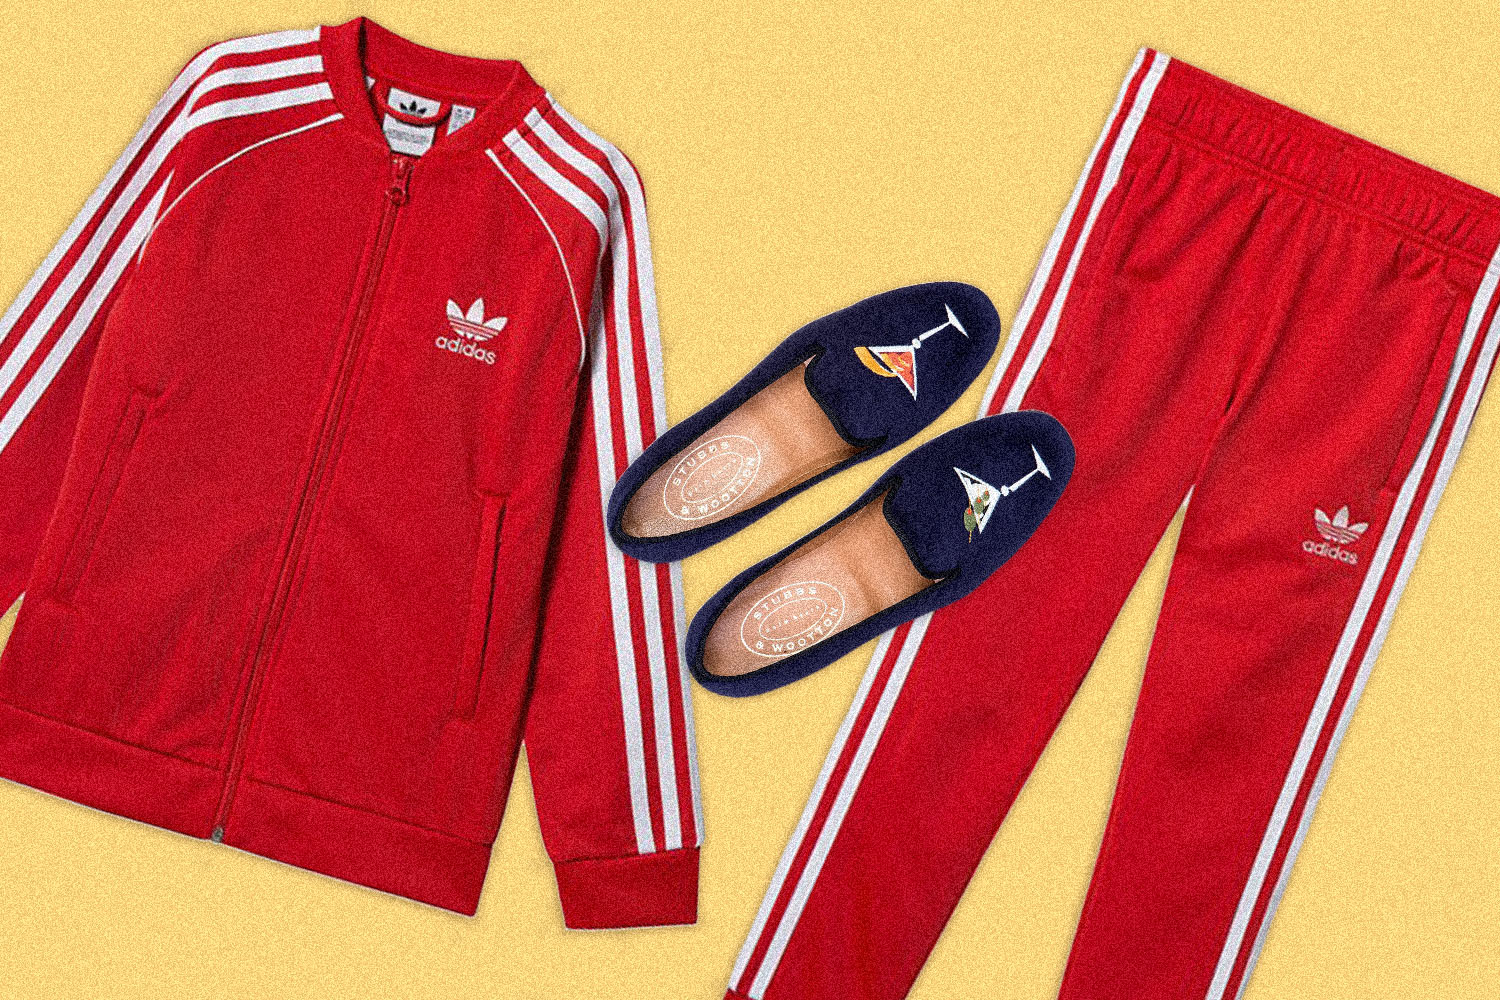 Adidas track suit work from home